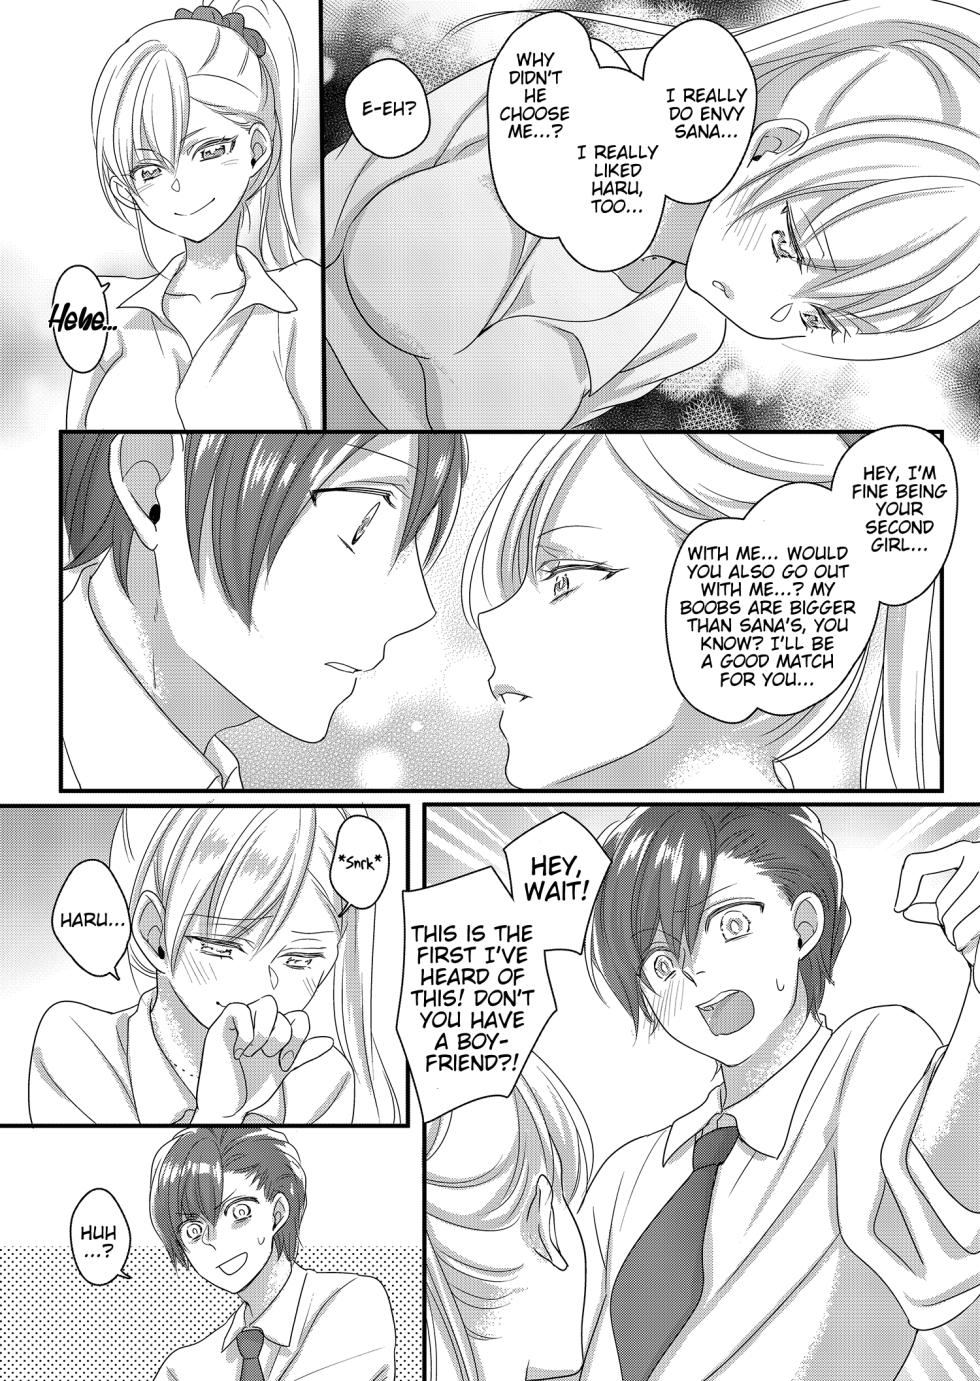 [Marialite (Lyna)] Haru to Sana 2 ～Love Connected Through Cosplay～[English] [Mikodayo] - Page 9